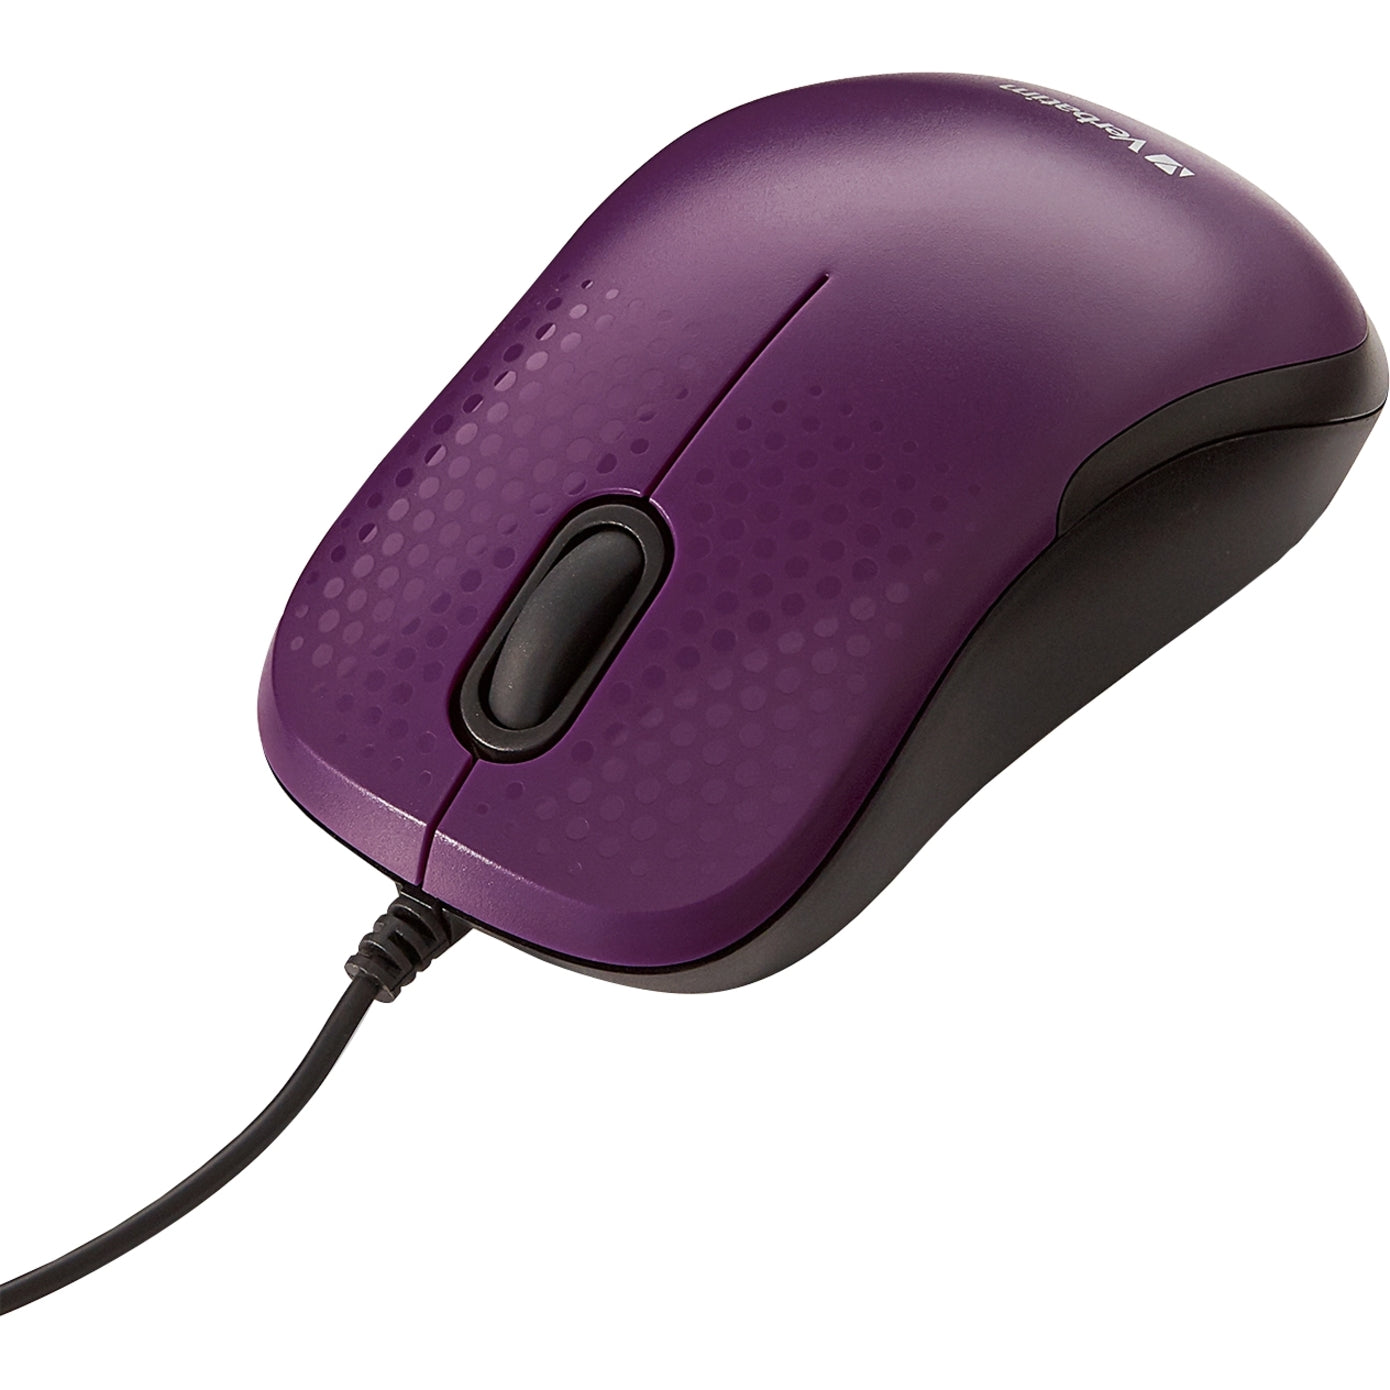 Verbatim 70235 Silent Corded Optical Mouse - Purple, 3 Buttons, 4.92 ft Cable